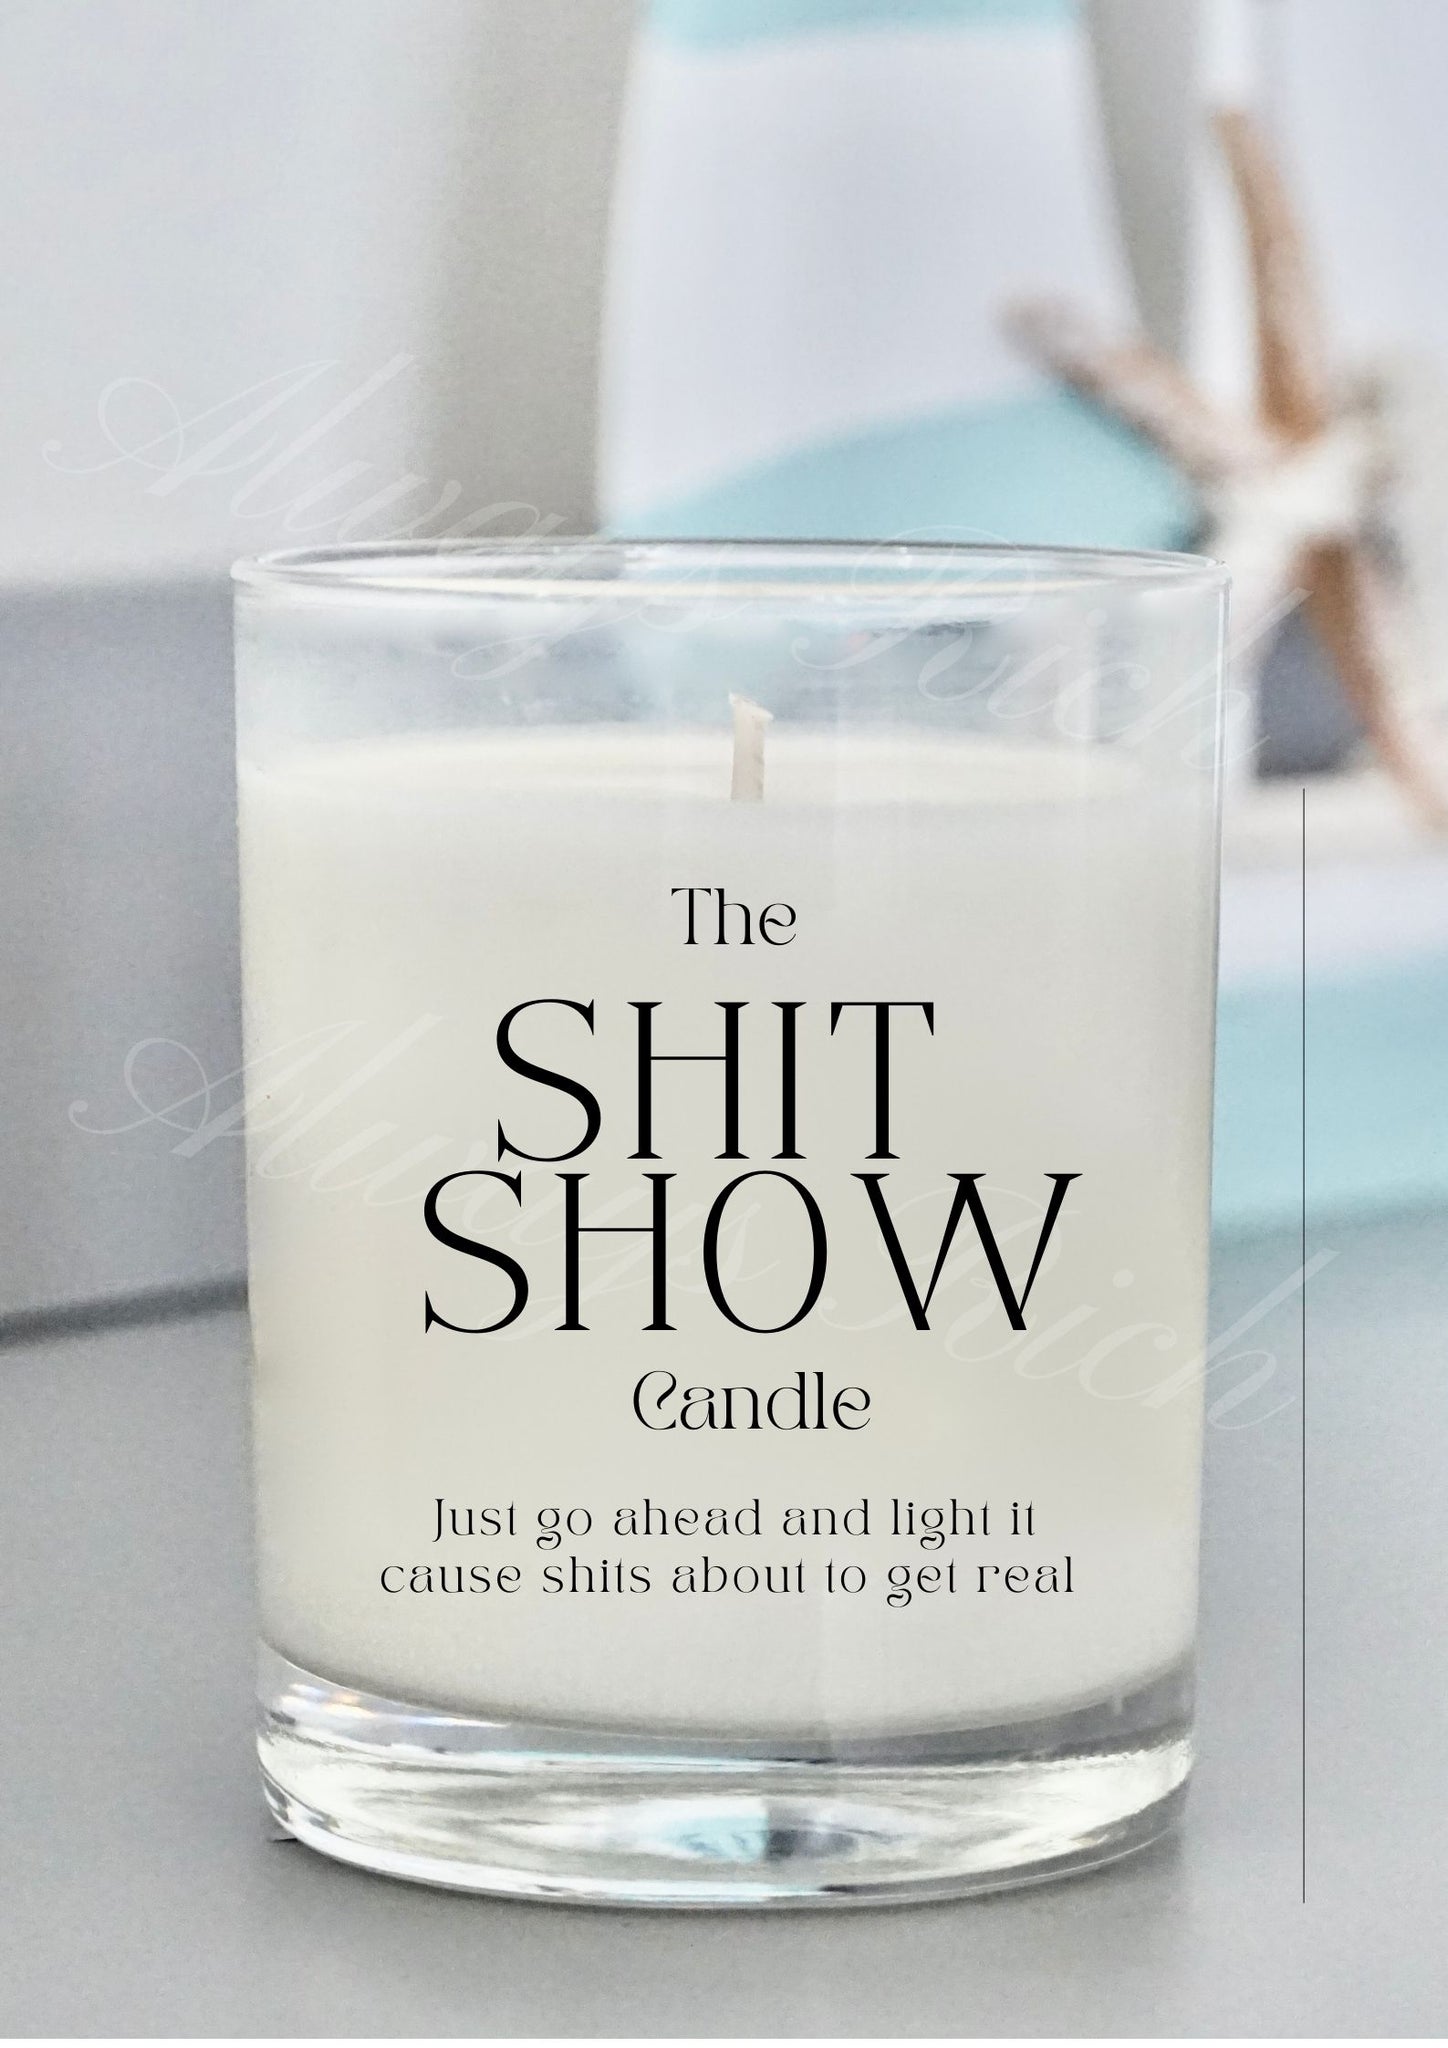 The Shit Show Candle